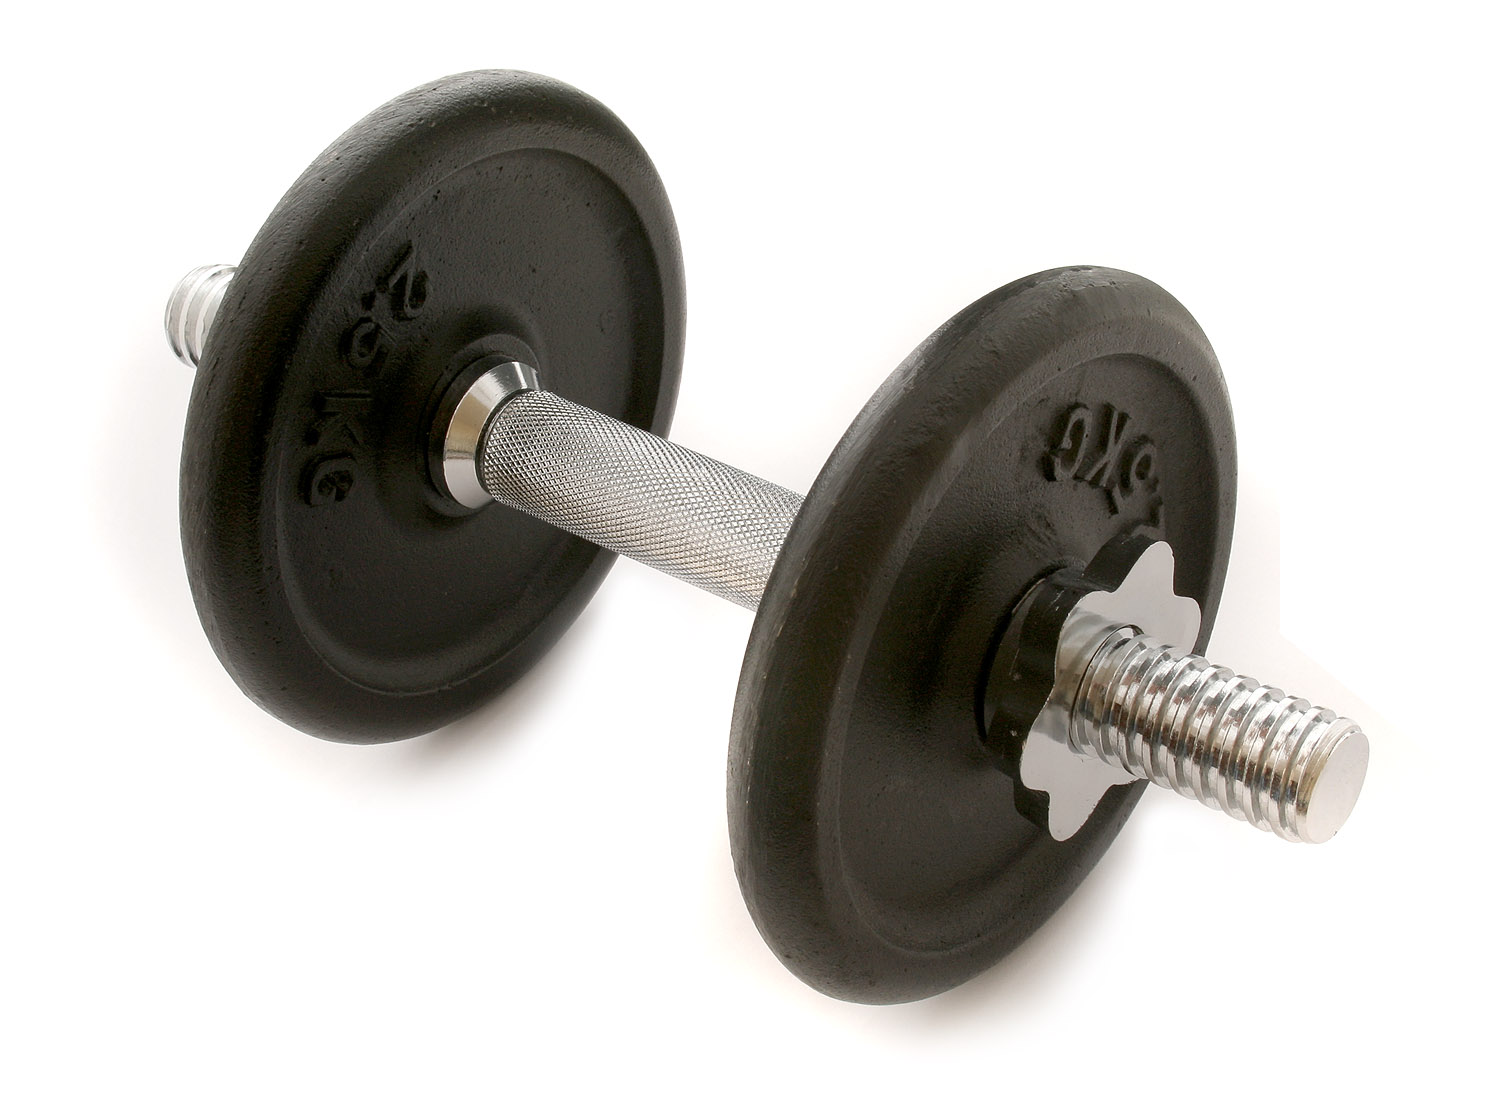 free-weights